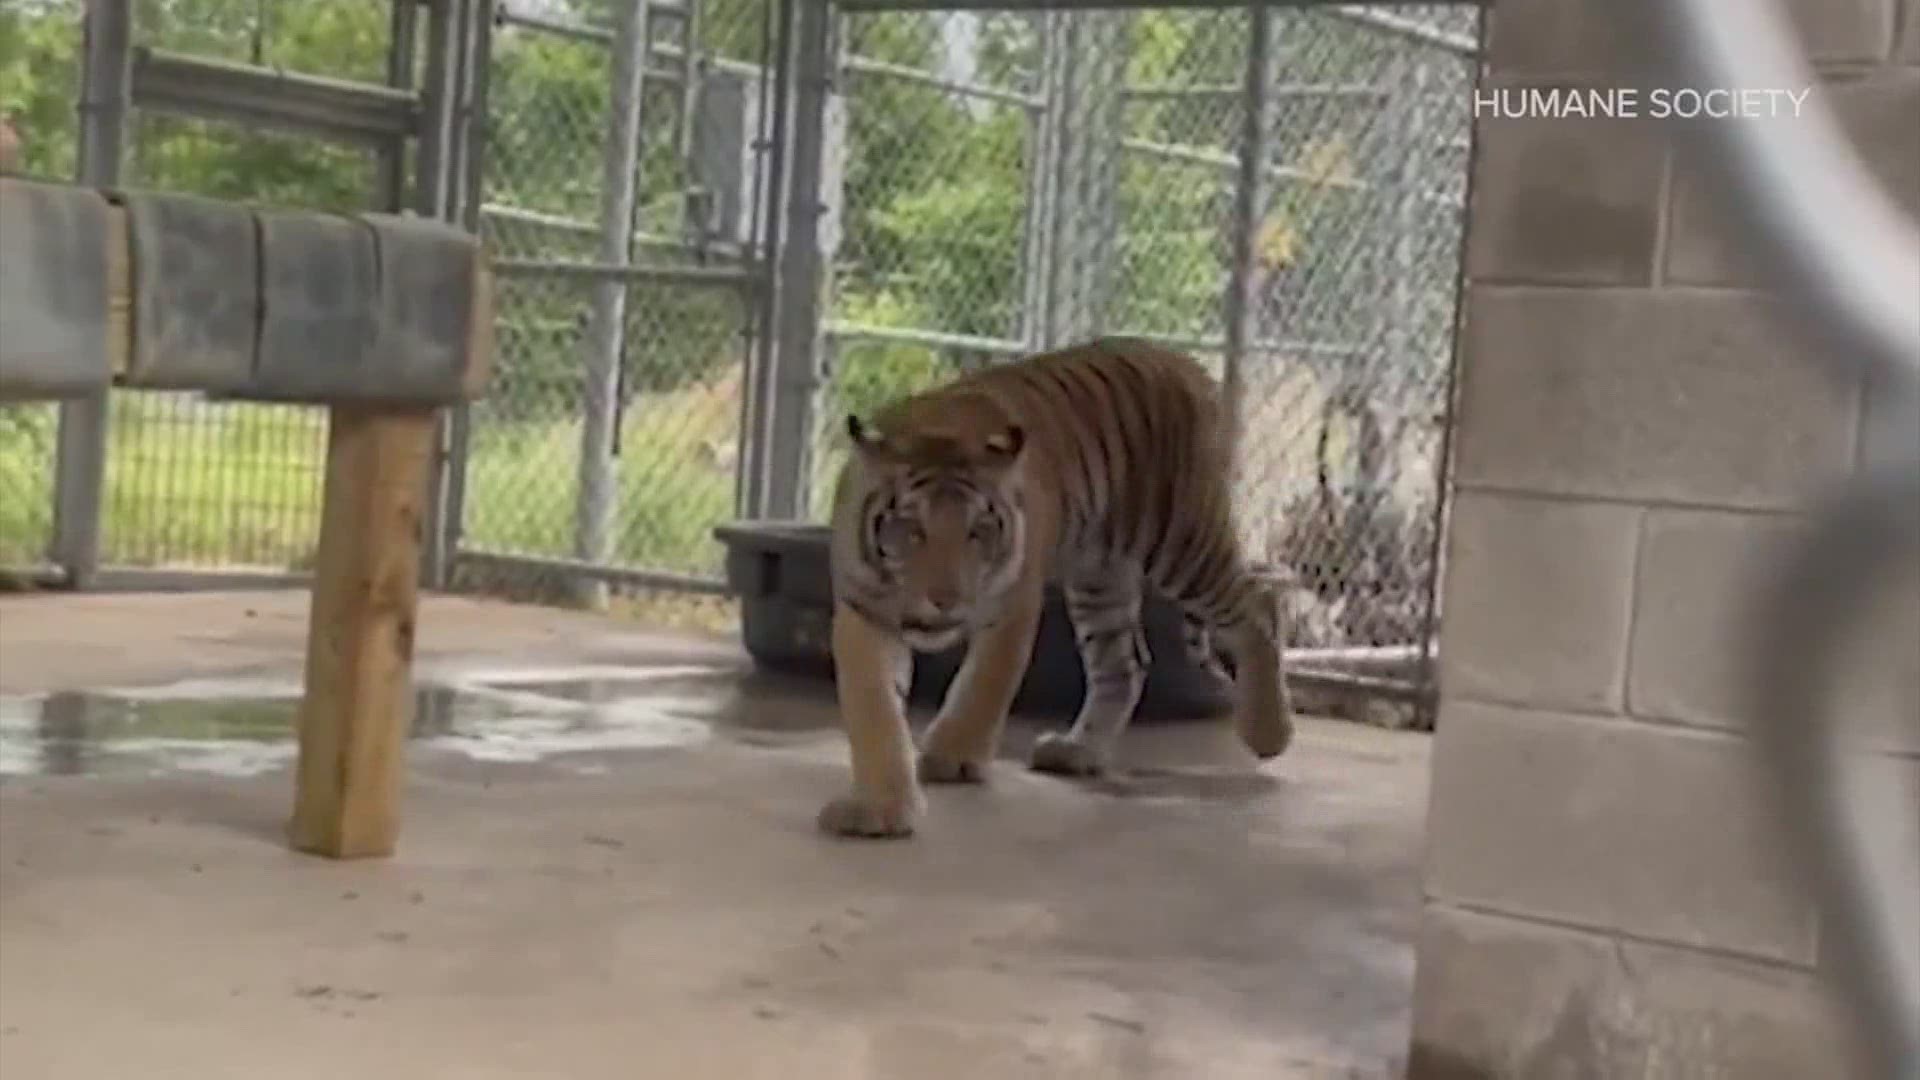 The tiger that made national headlines after being spotted in a west Houston neighborhood is closer to being released into a larger habitat.